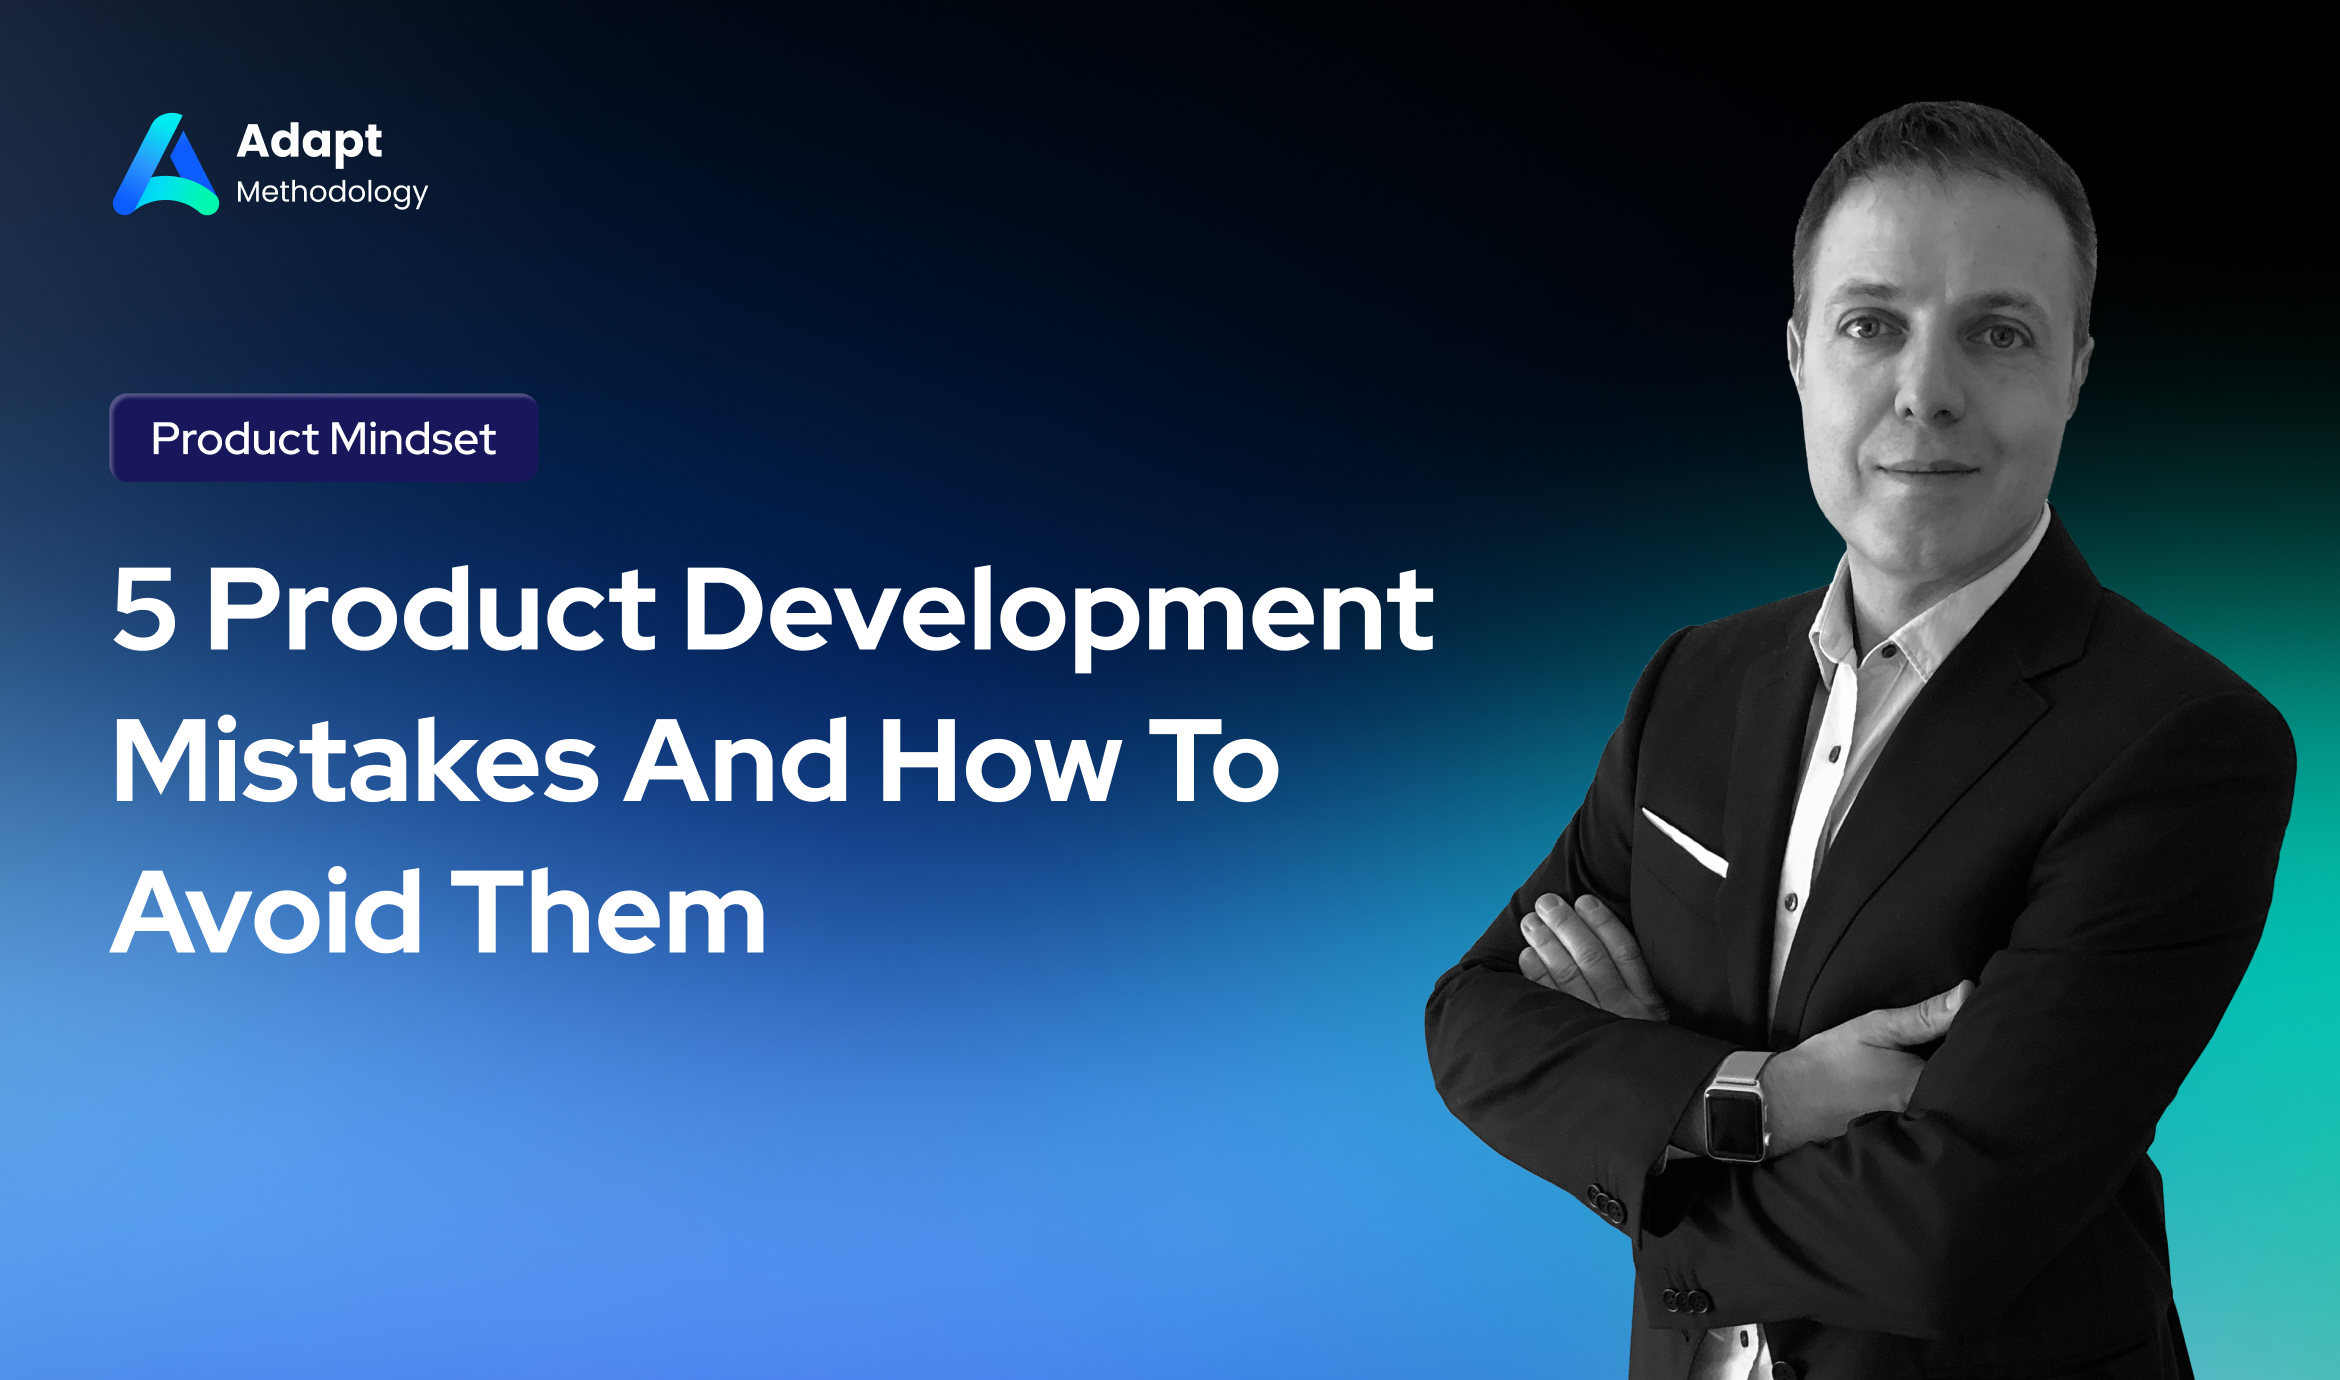 5 Product Development Mistakes And How To Avoid Them